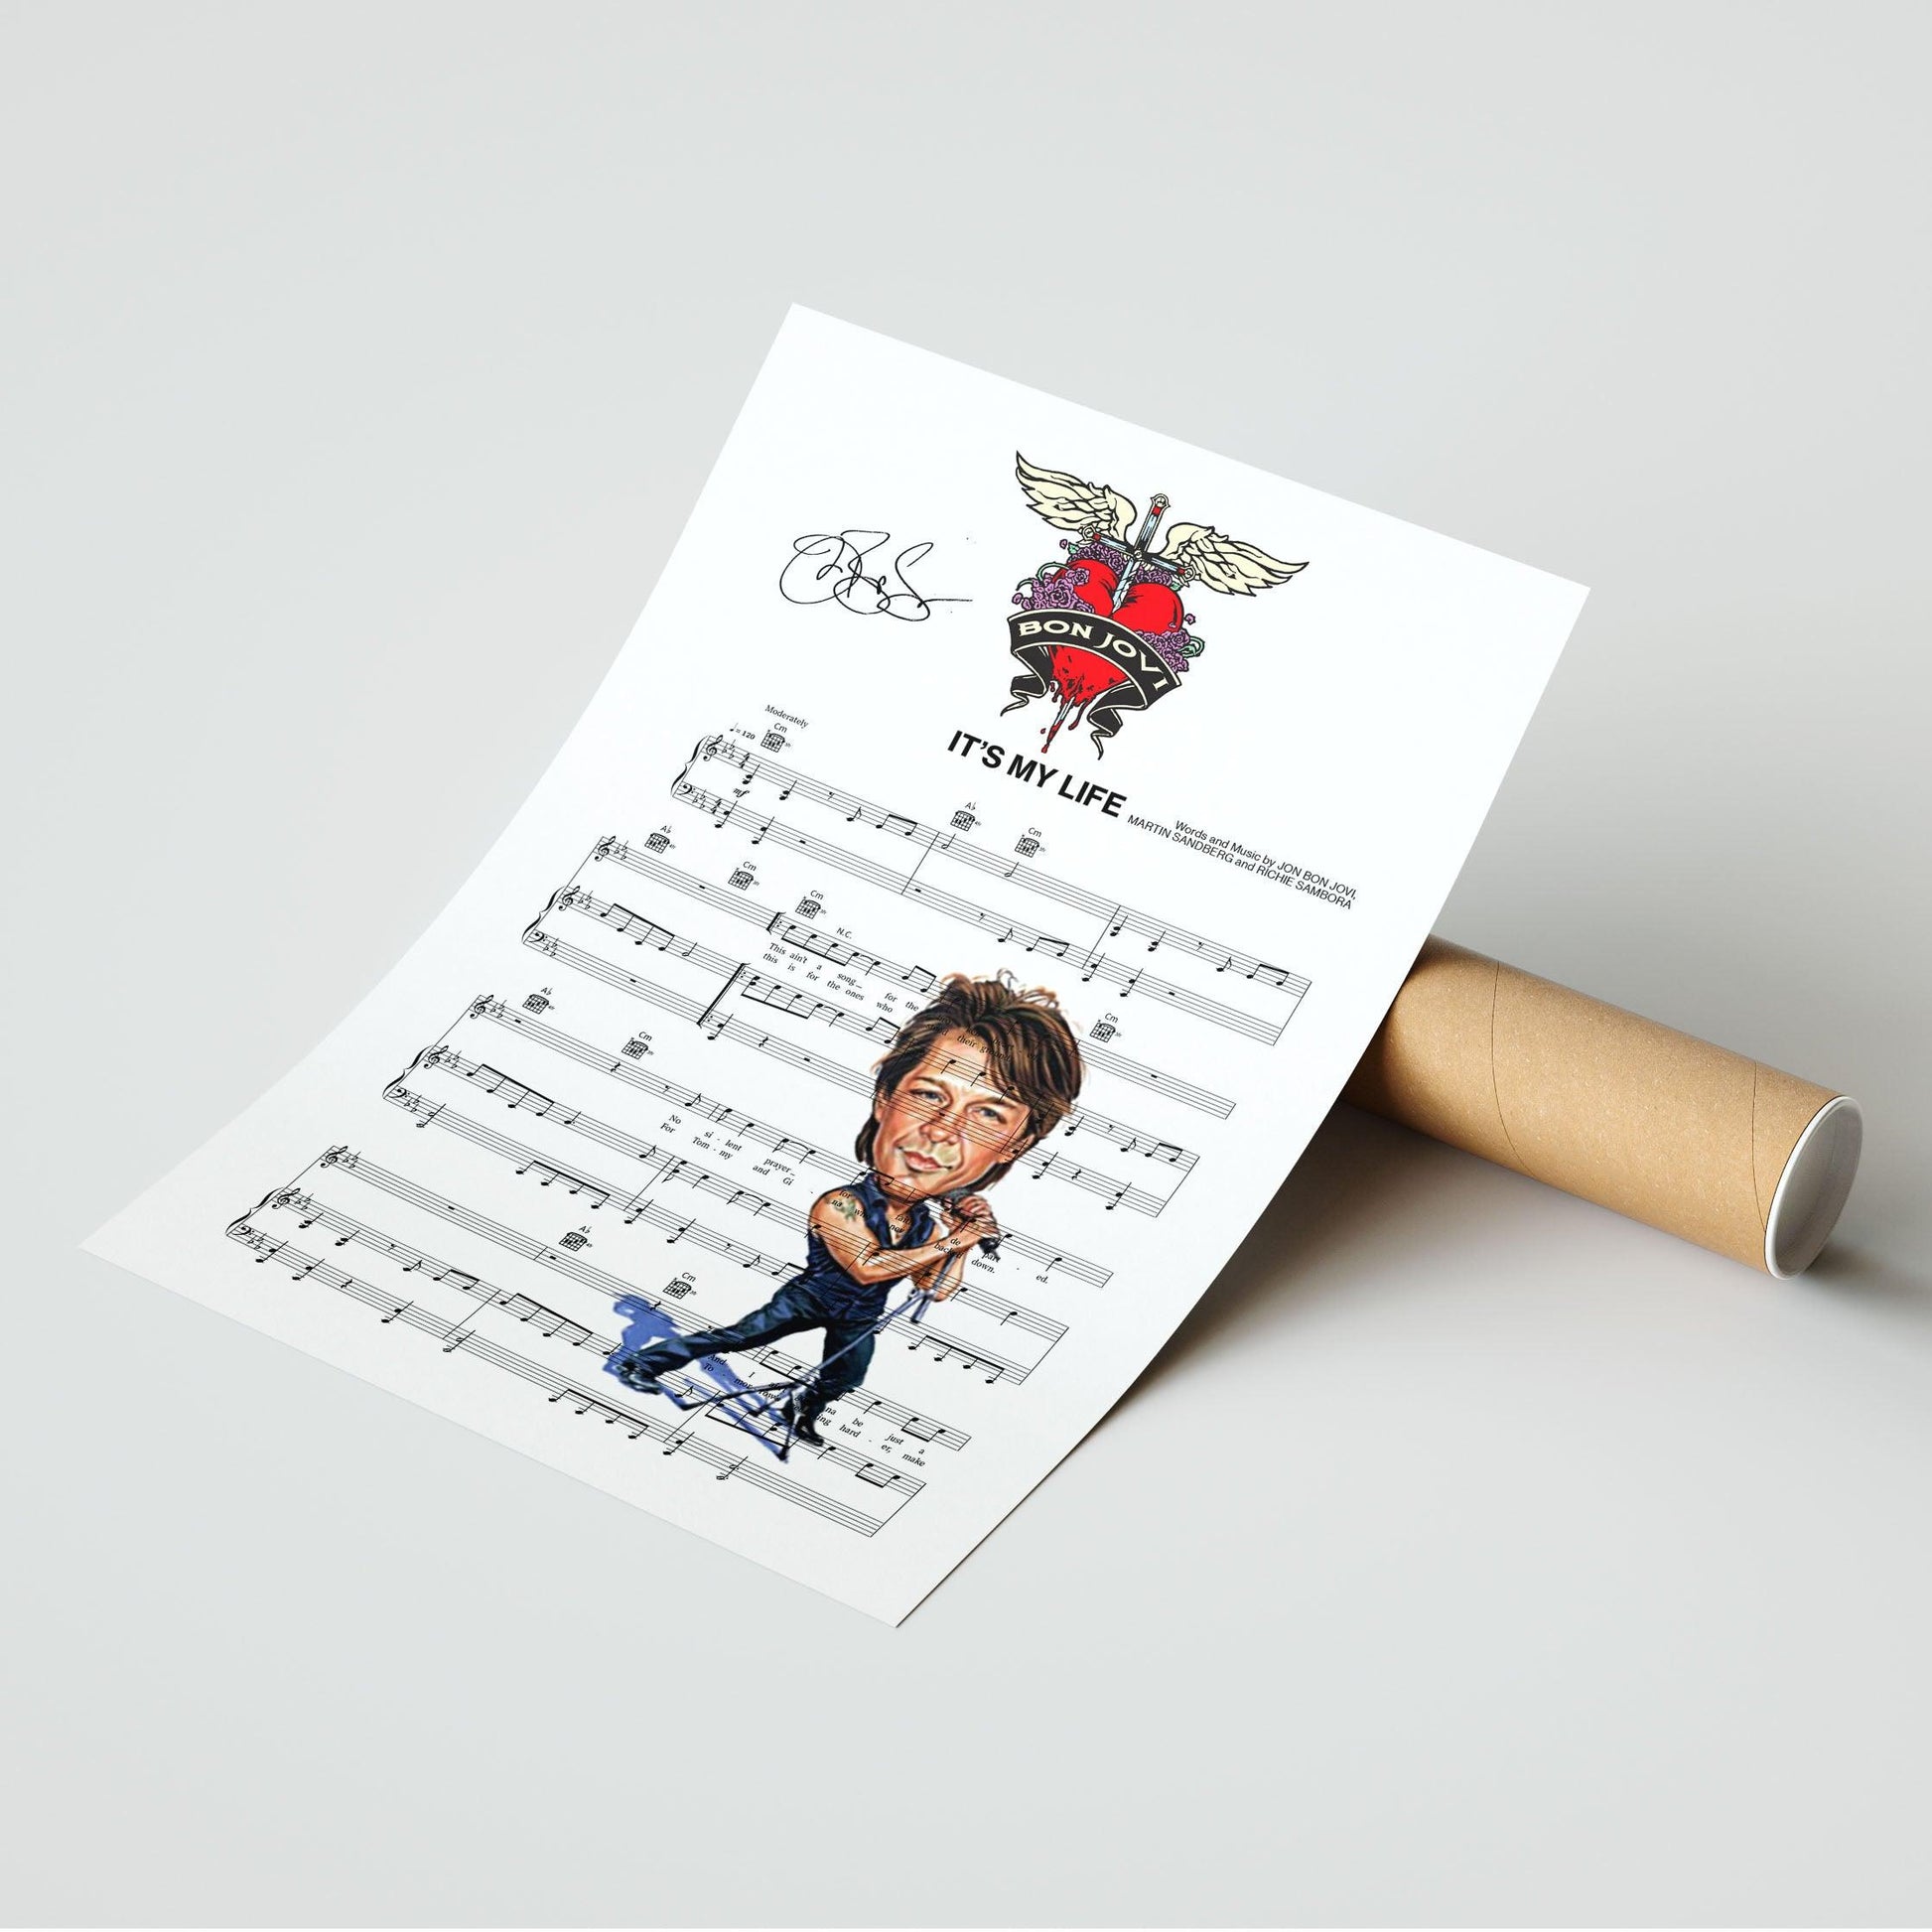 Bon Jovi - It's My Life Music Print | Song Music Sheet Notes Print Everyone has a favorite song especially Bon Jovi - It's My Life, and now you can show the score as printed staff. The personal favorite song sheet print shows the song chosen as the score. 